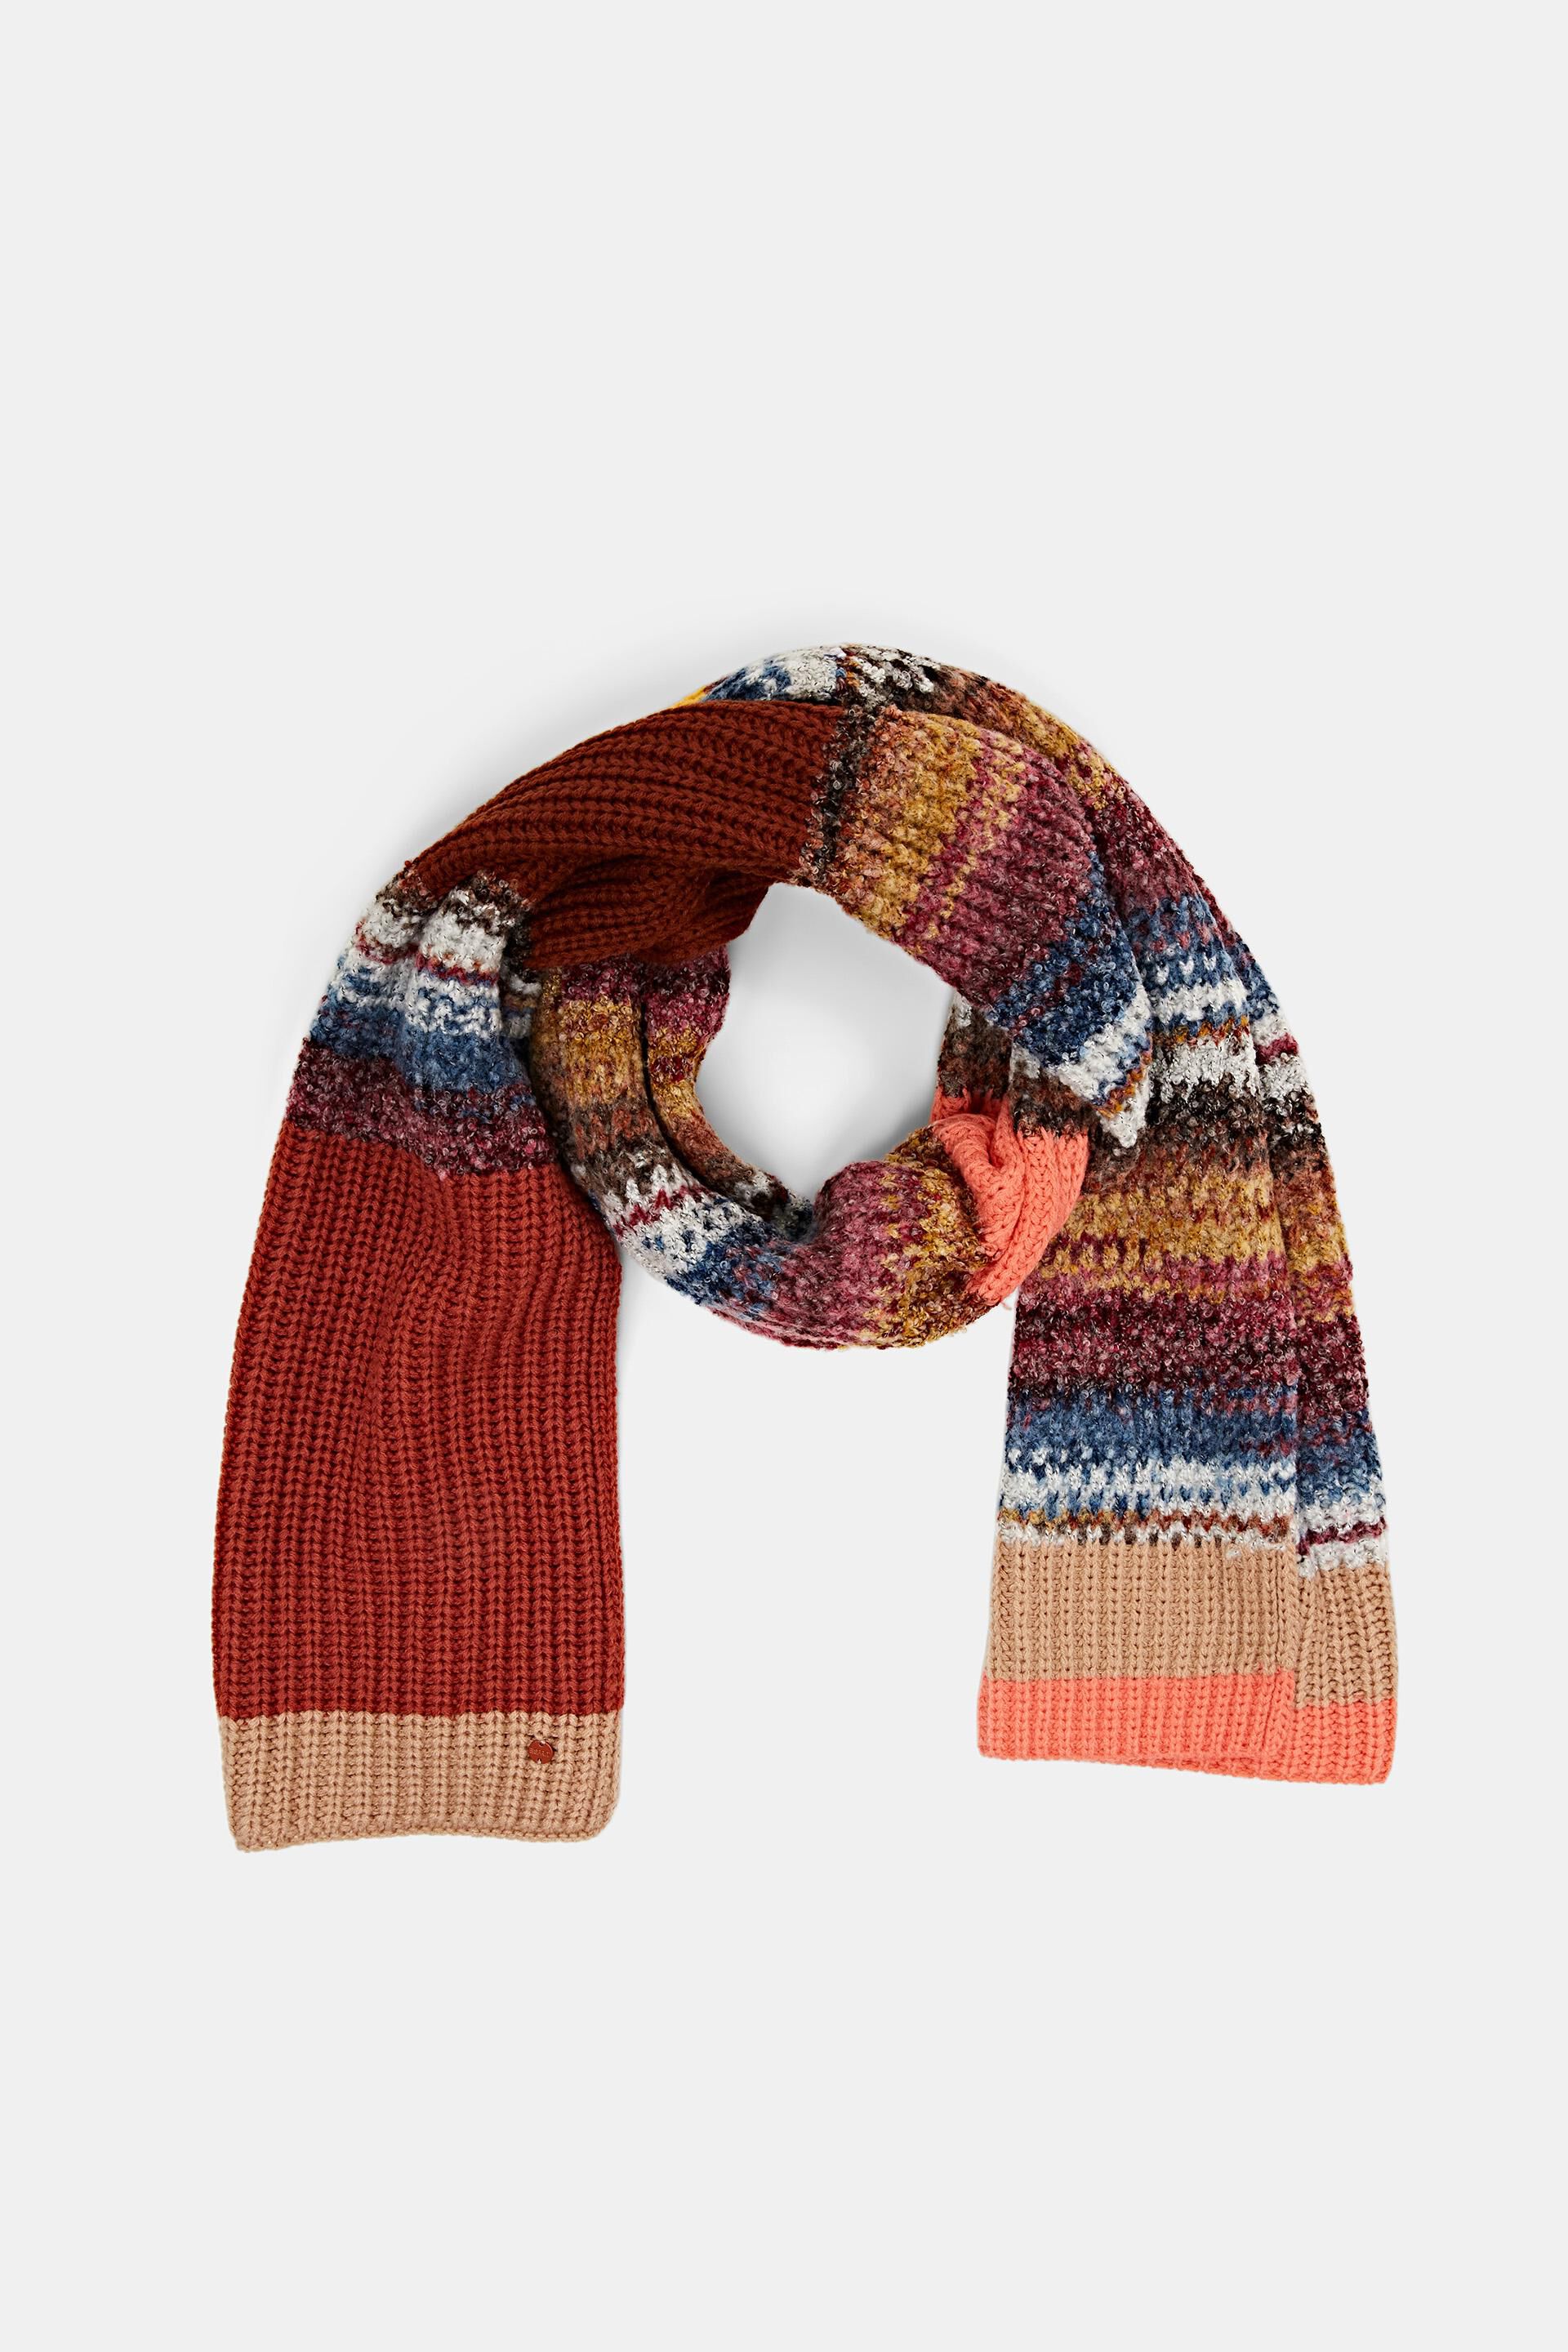 Multi-coloured knit scarf, wool blend